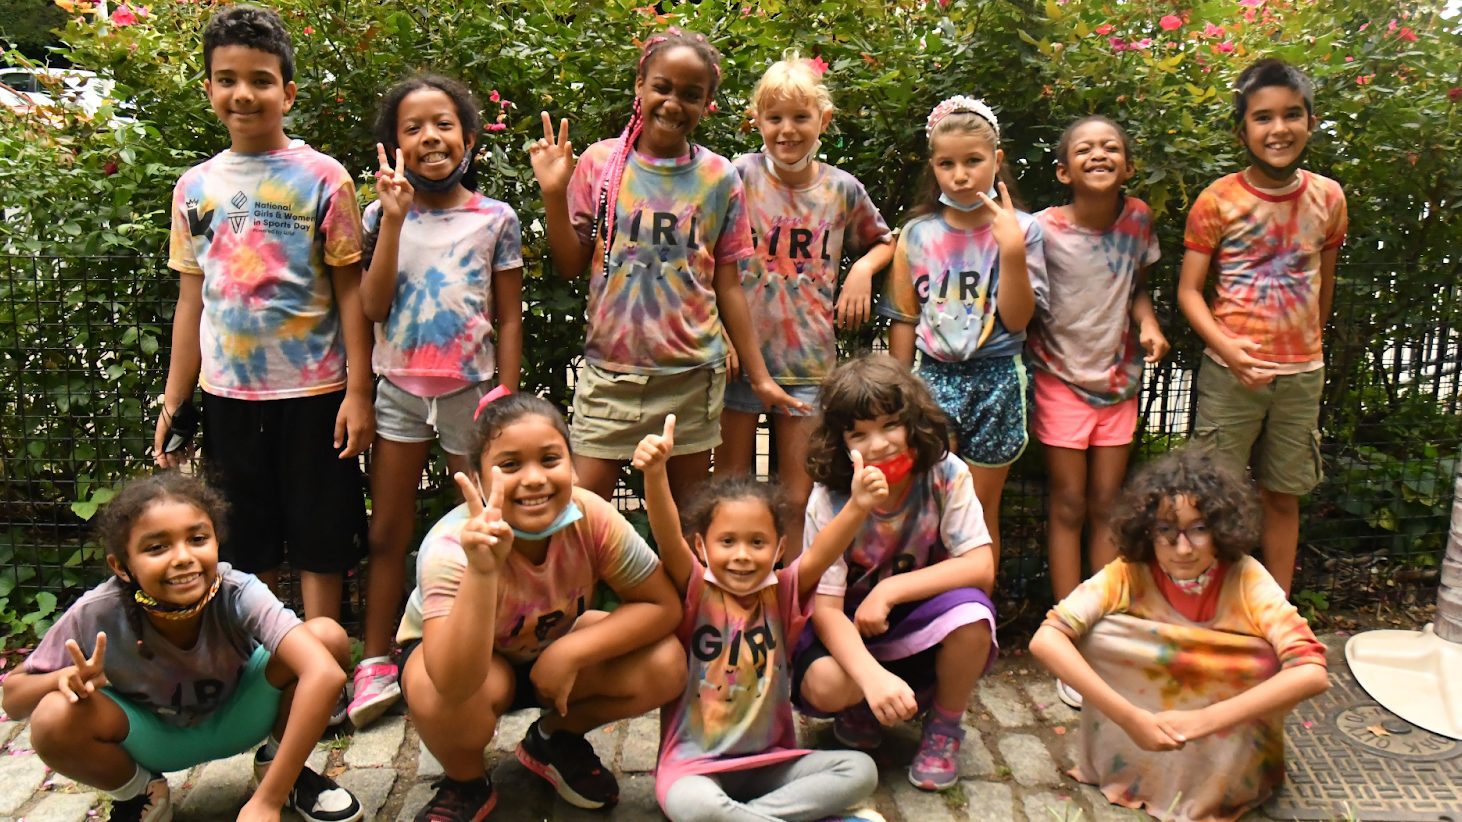 5 Reasons You Should Sign Up for Summer Camp